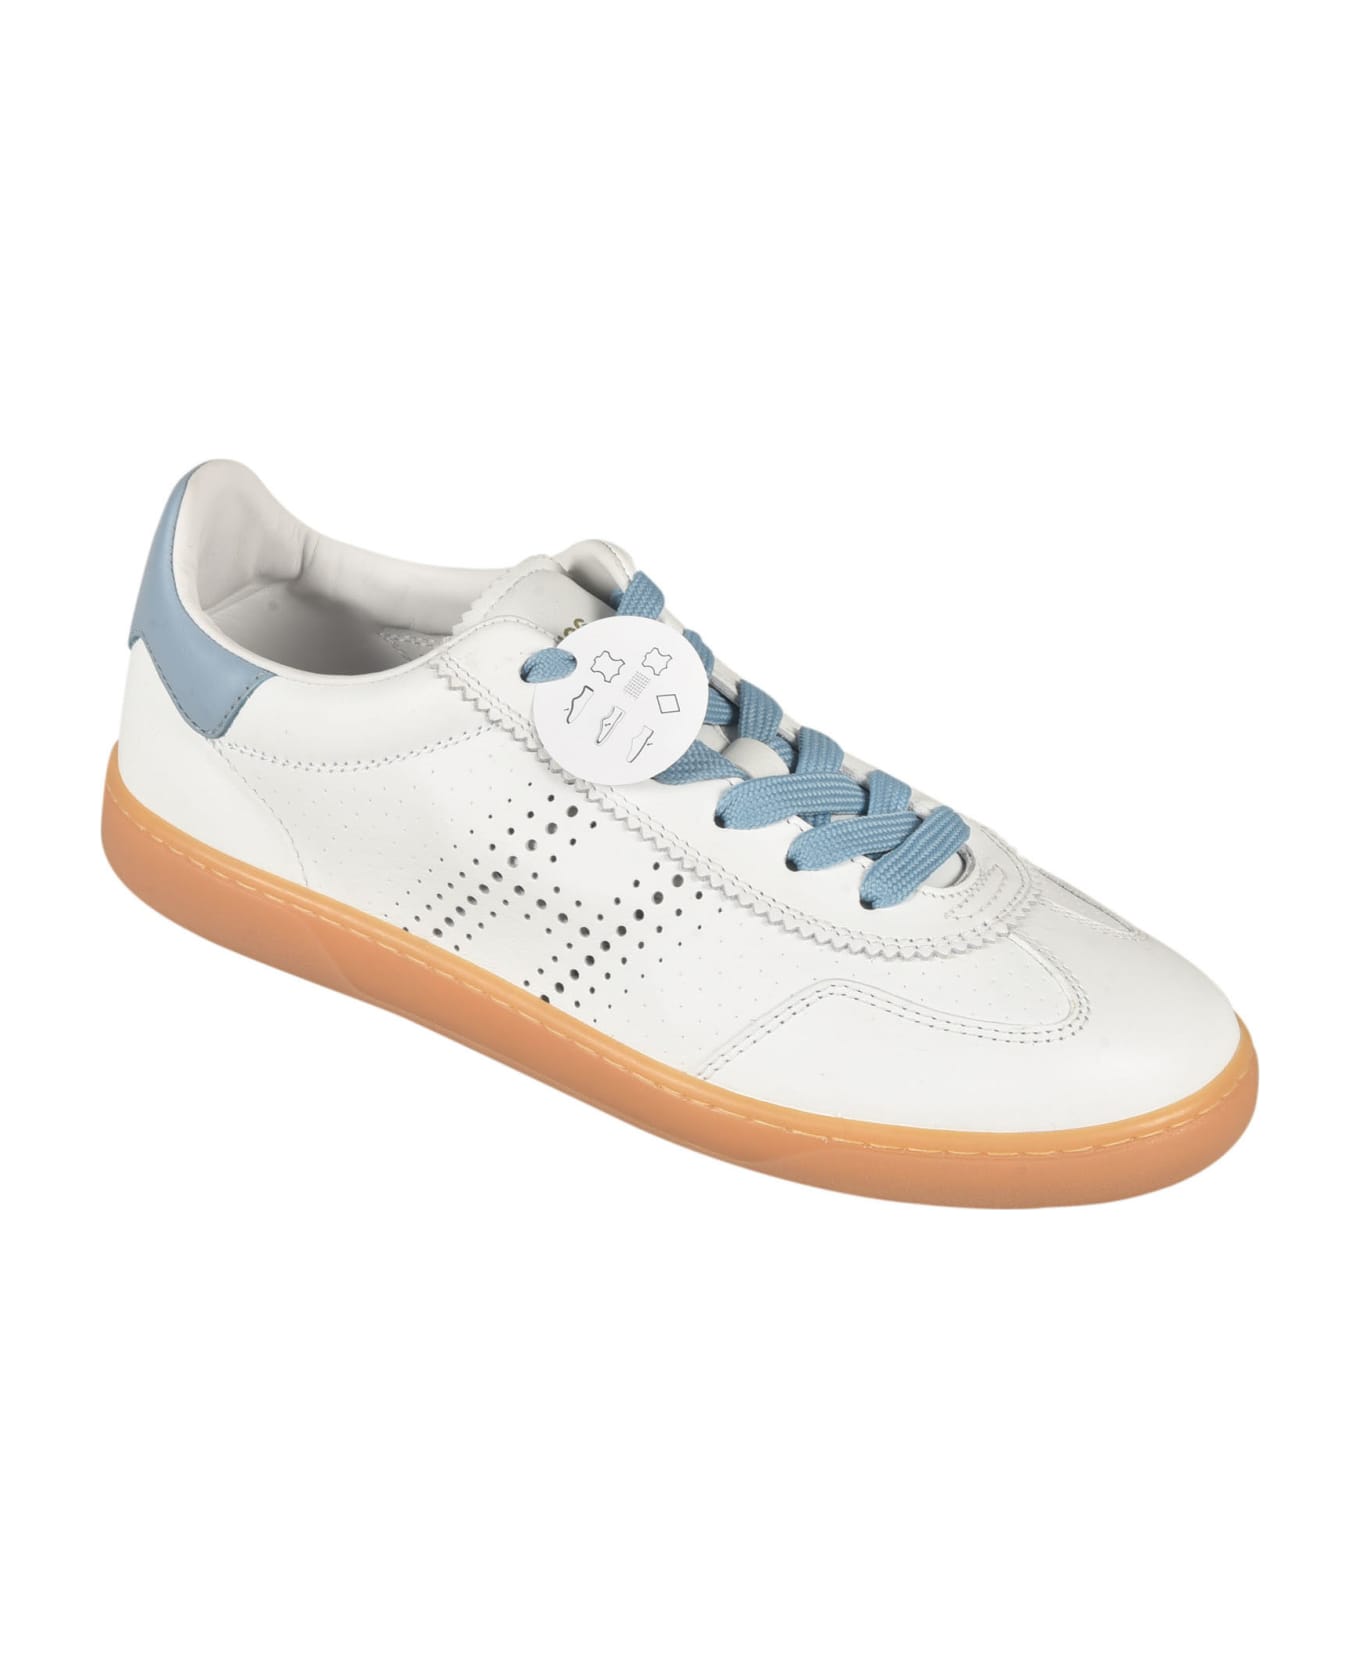 Hogan Perforated Low Sneakers - White